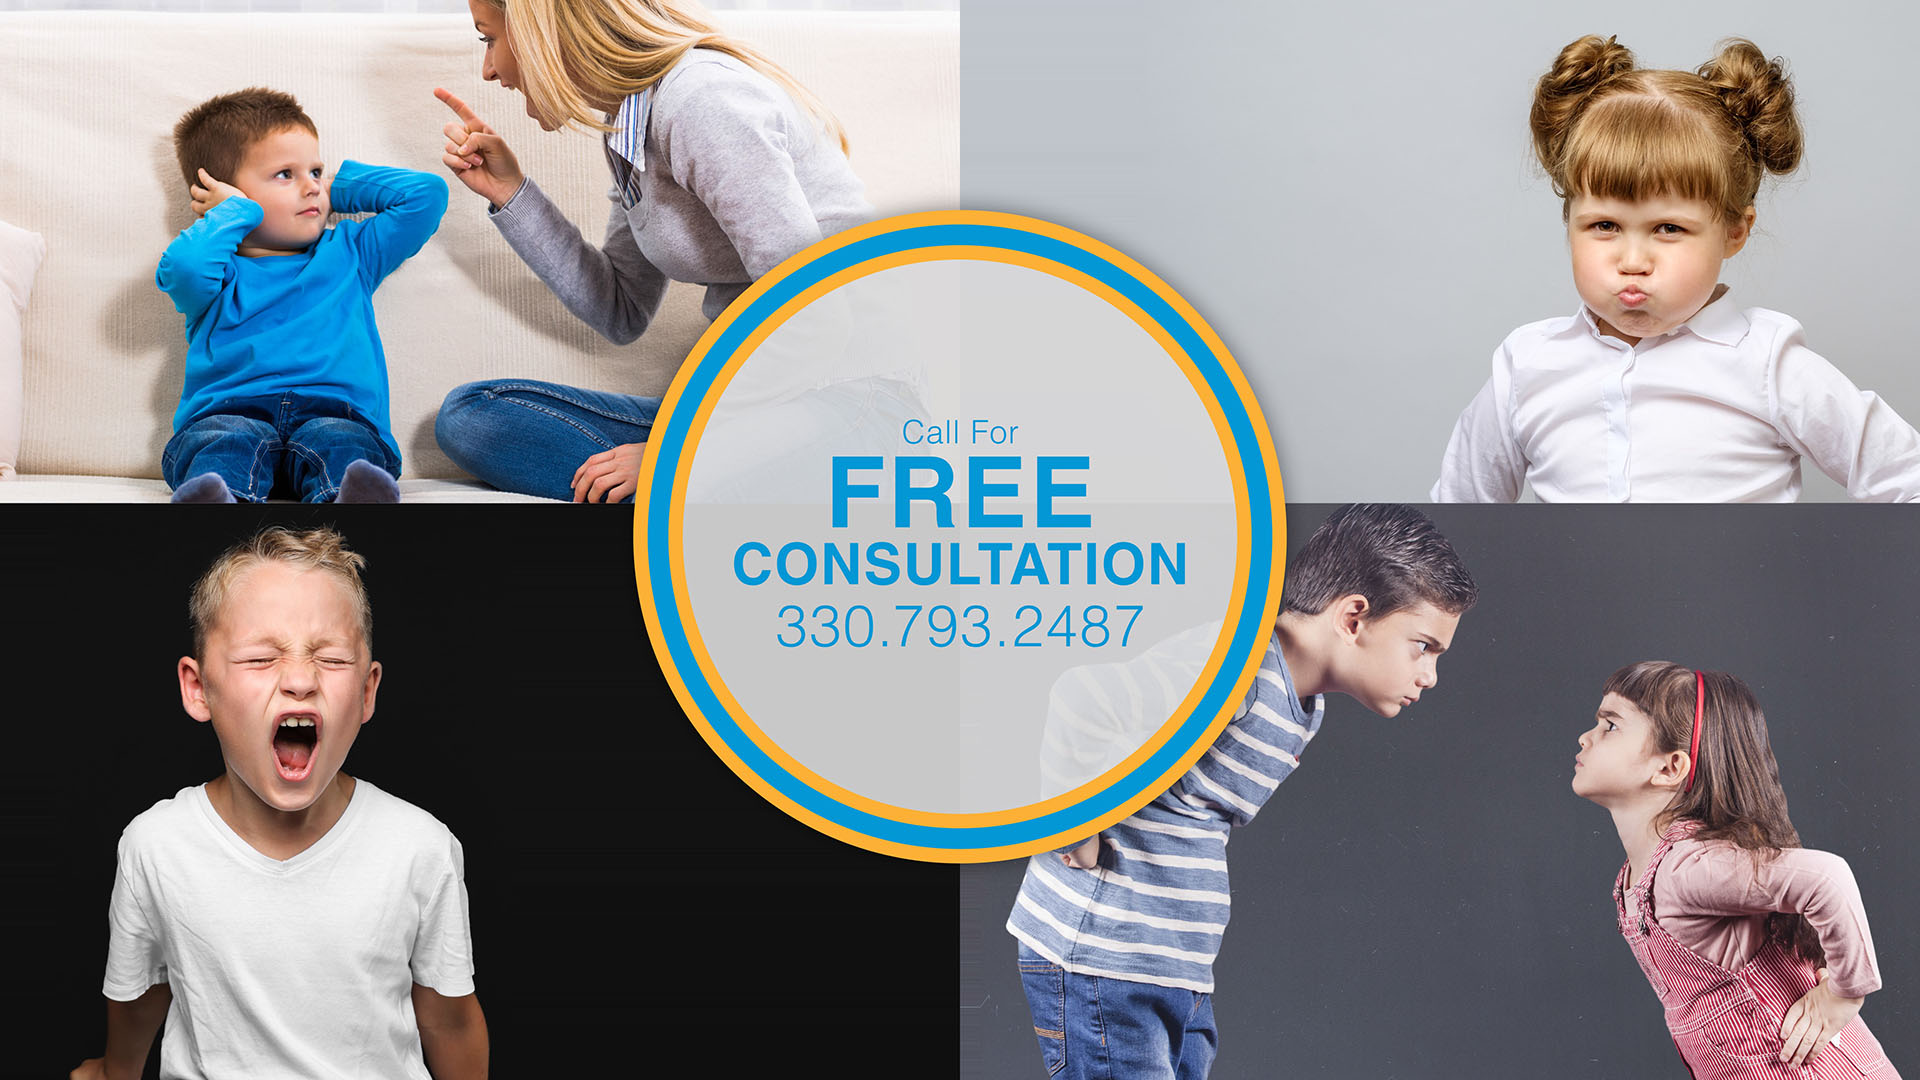 Call for a free consultation - 330.793.2487